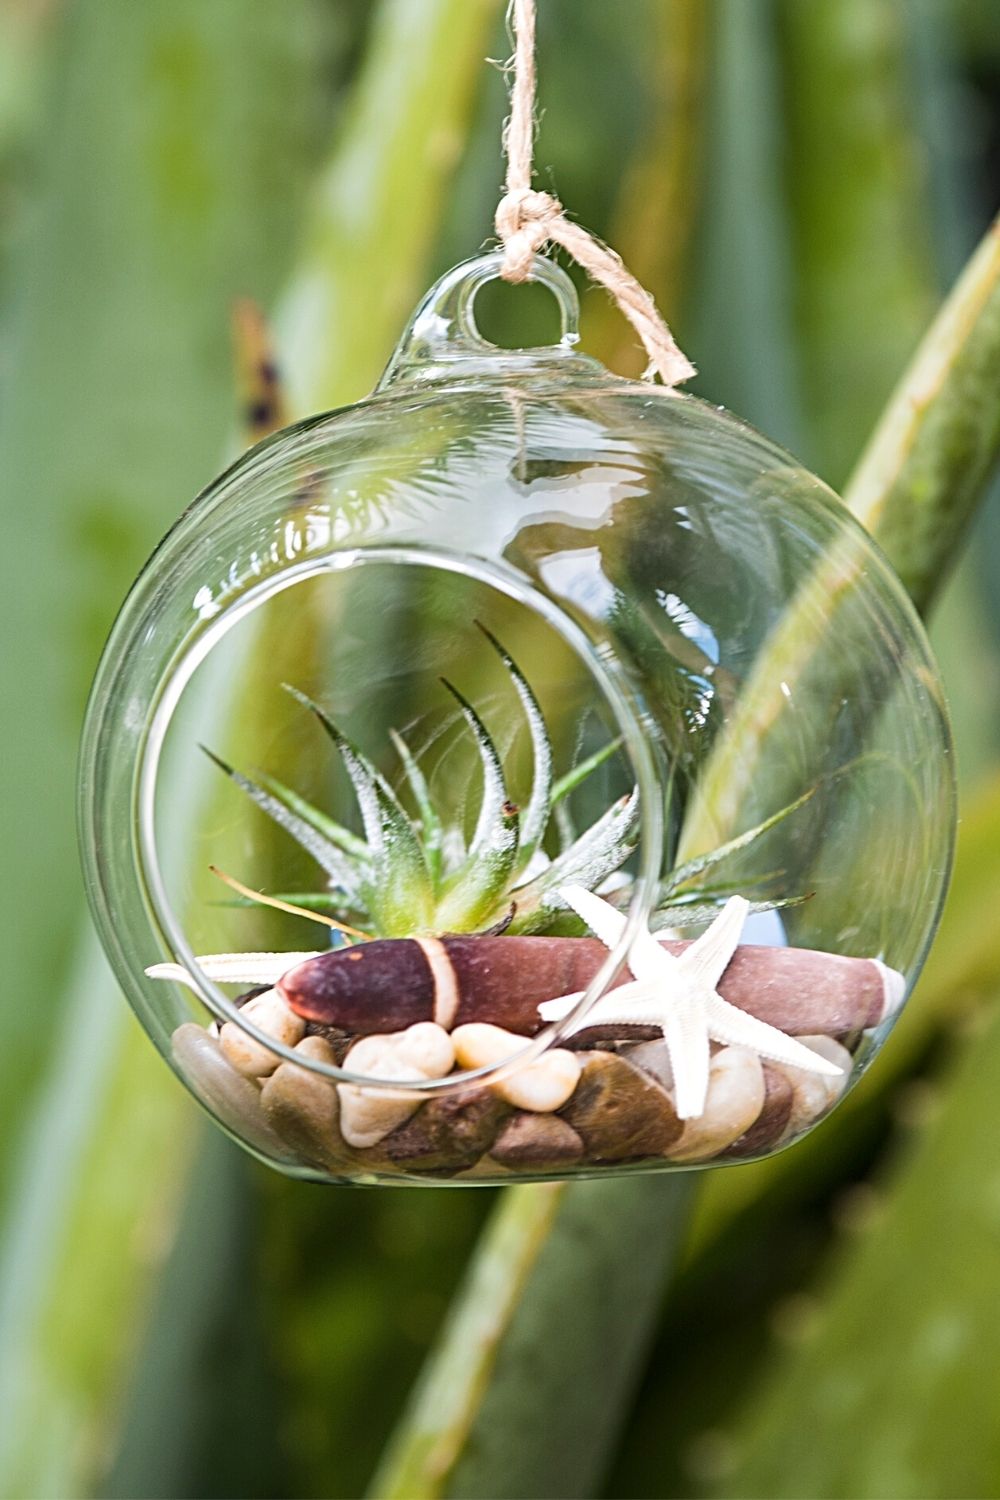 If you're looking for a low-maintenance plant to grow in a terrarium, Air plant is your best choice